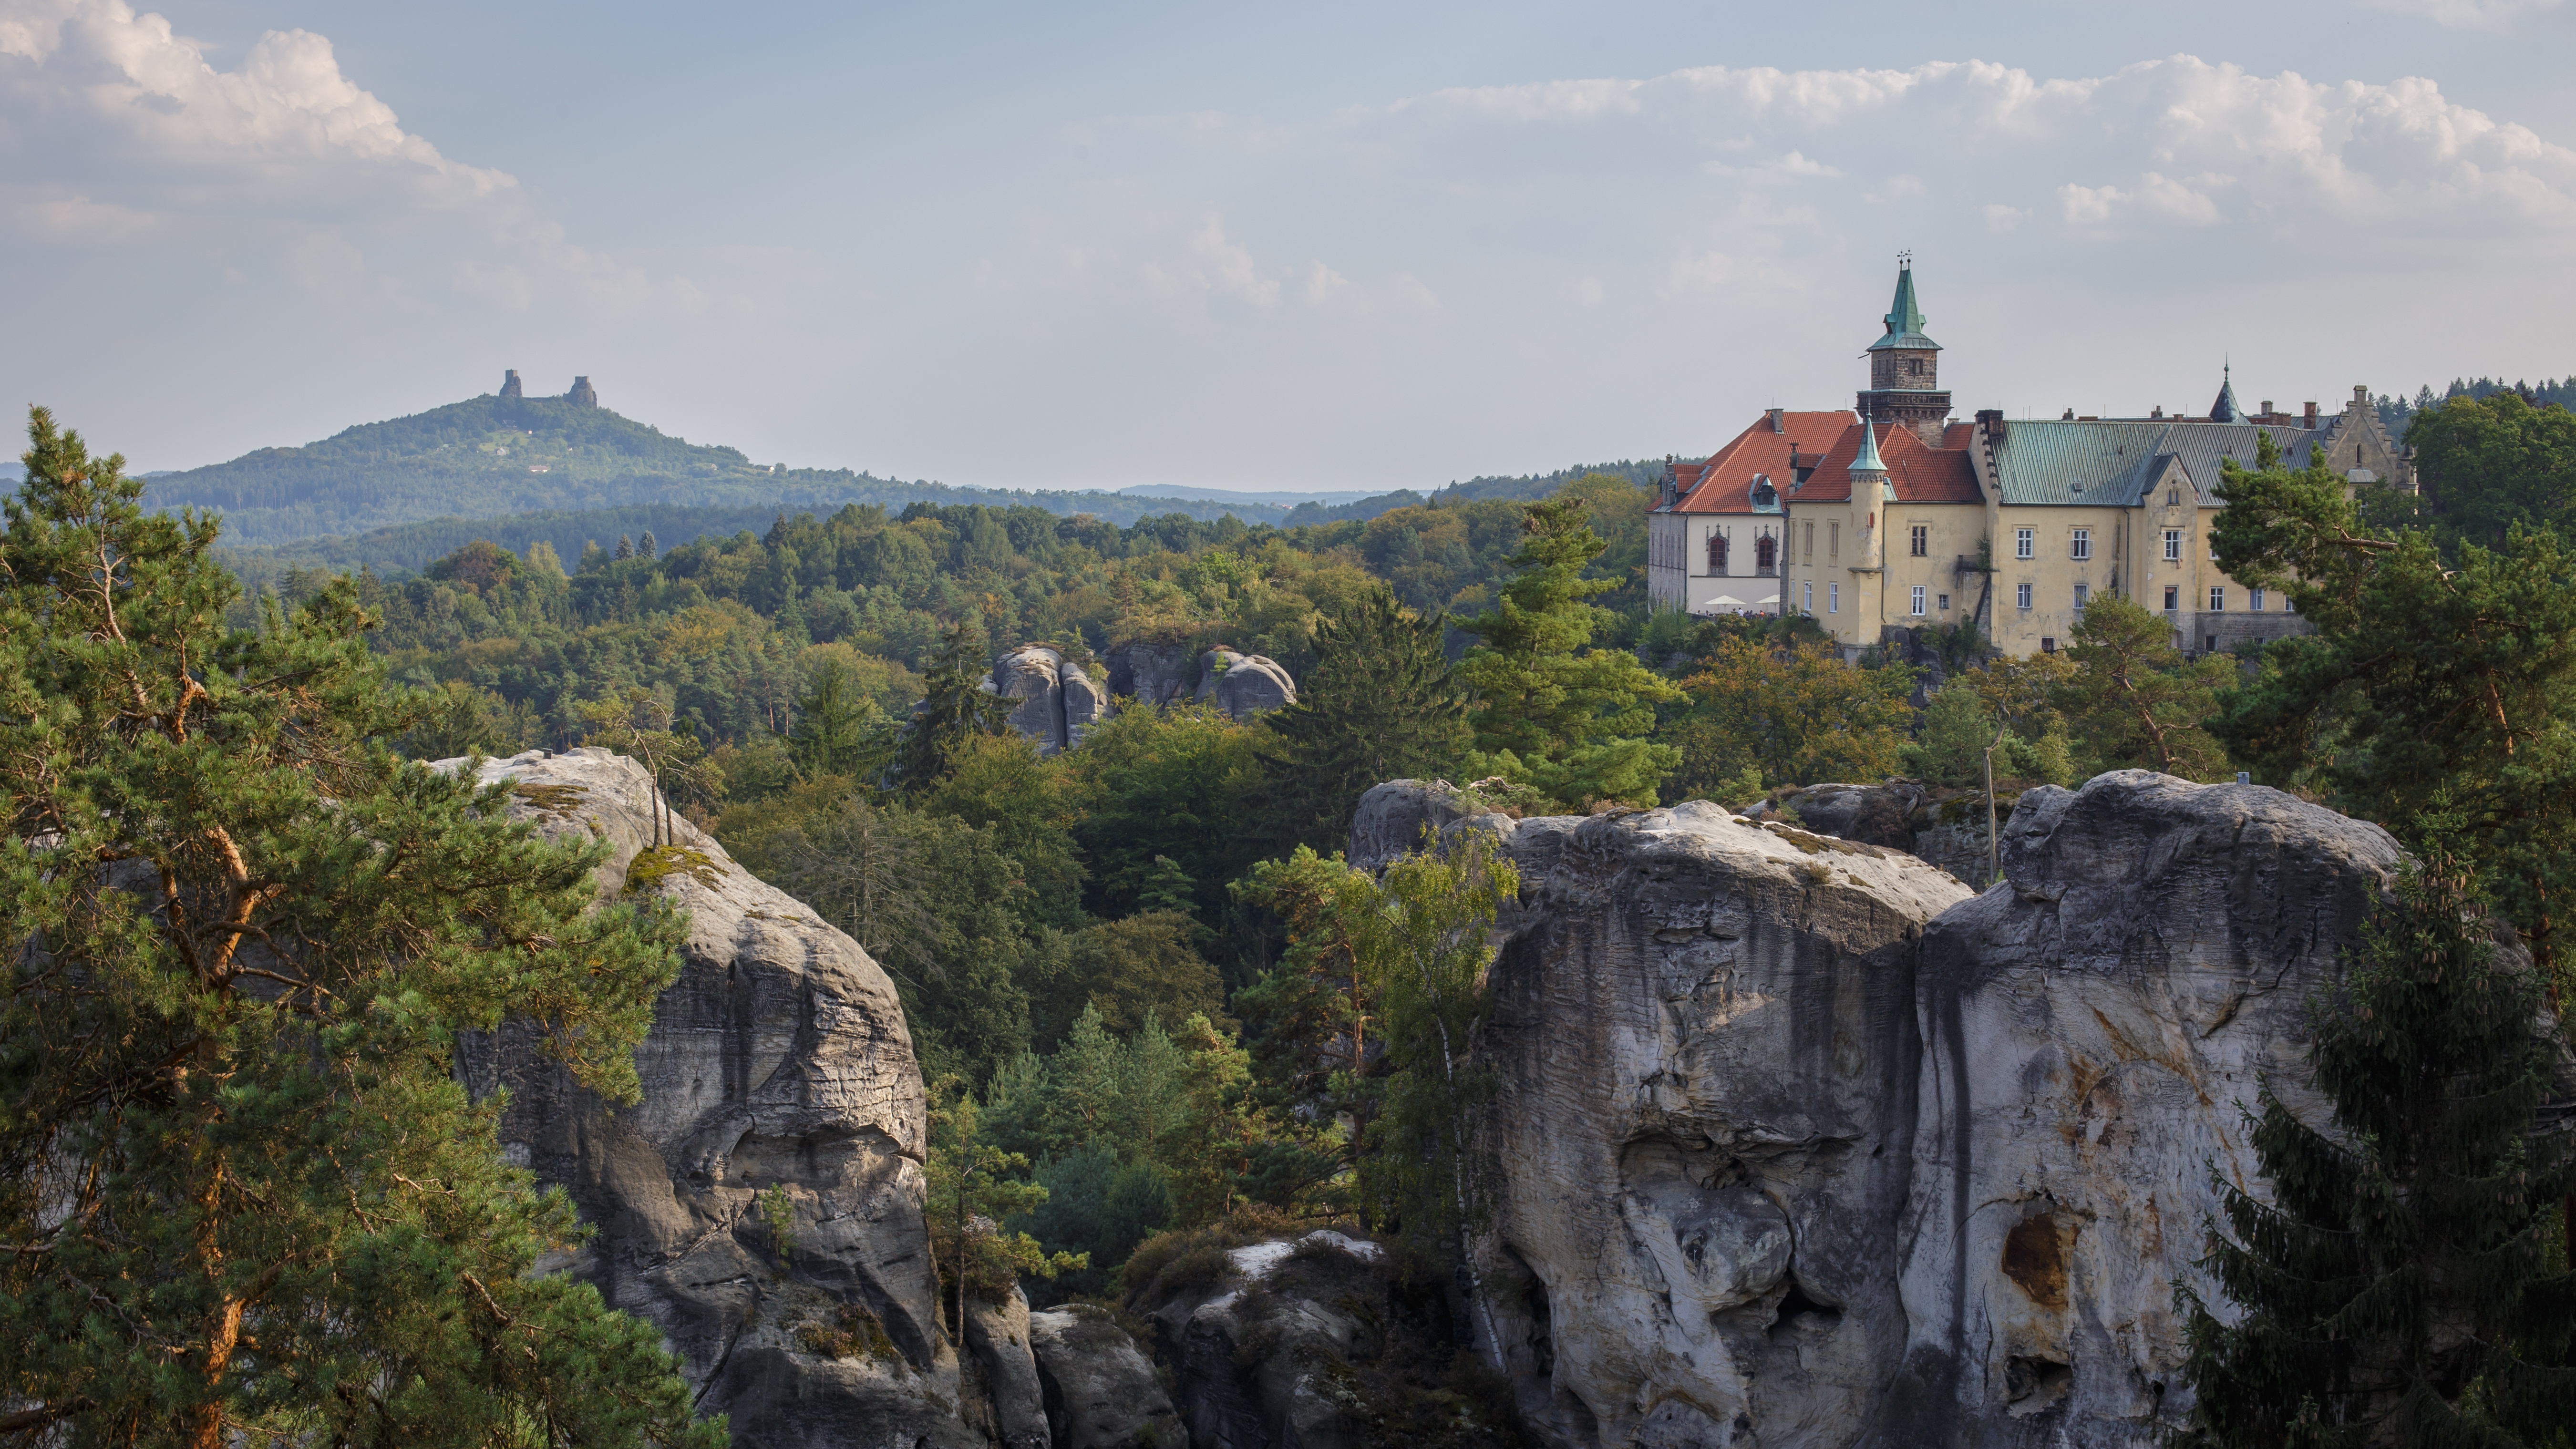 A palace on the edge of a cliff in the Czech Republic